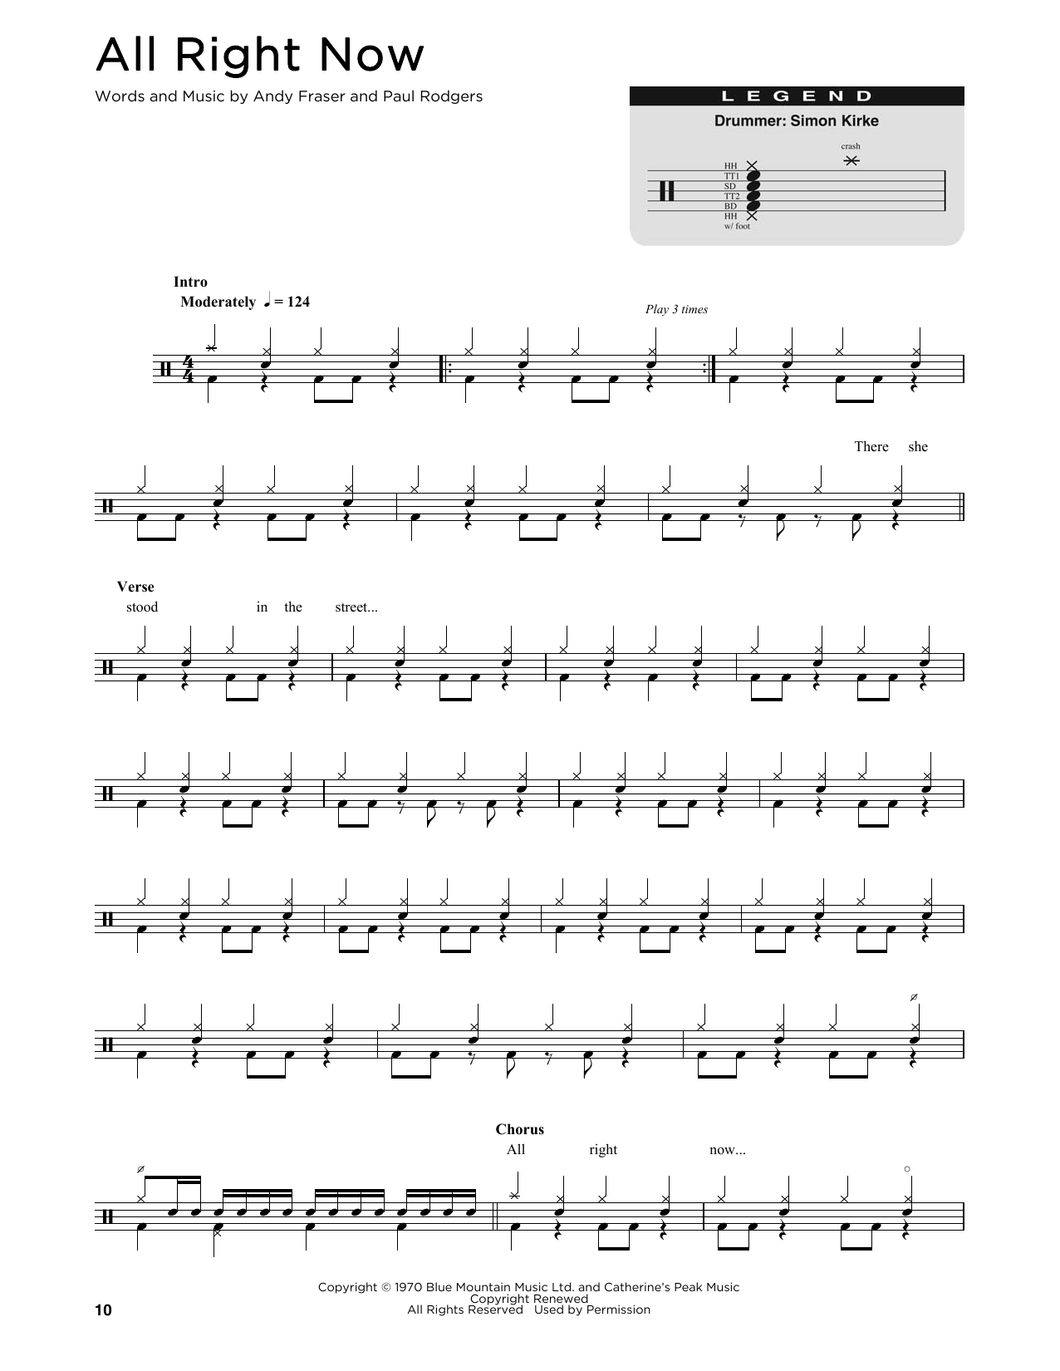 All Right Now - Free (The Band) - Full Drum Transcription / Drum Sheet Music - SheetMusicDirect DT176312